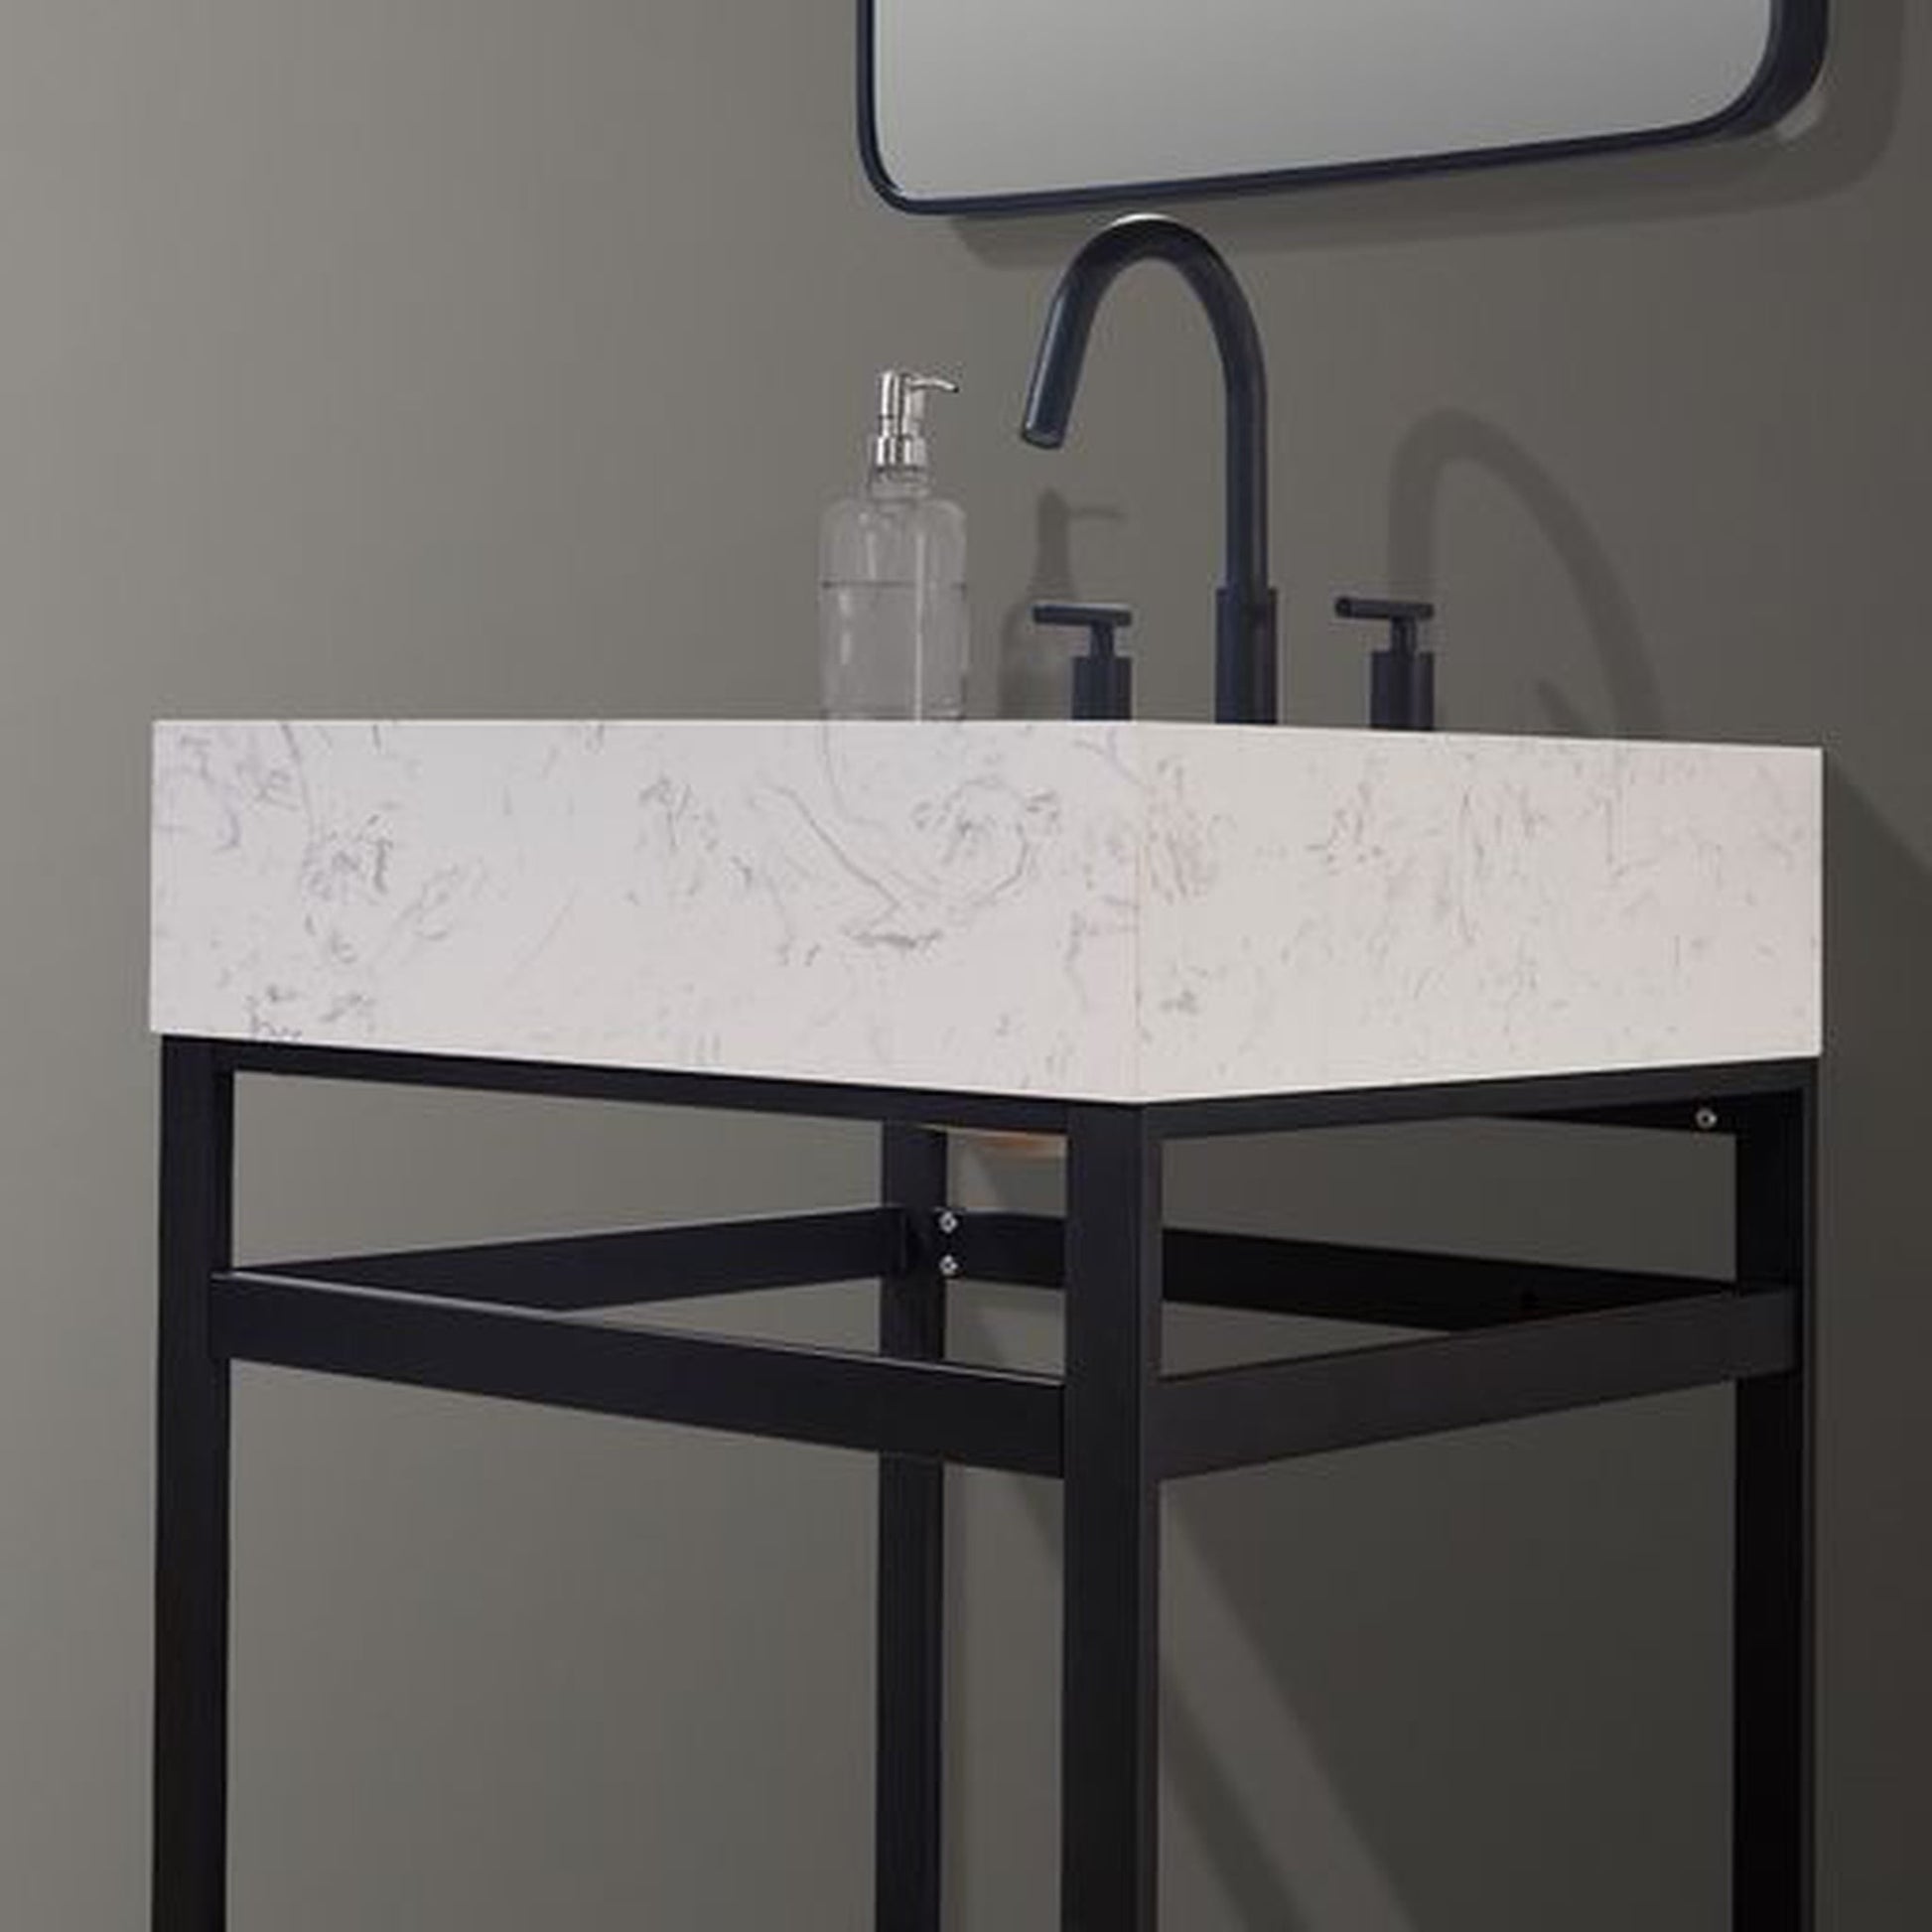 Altair Merano 24" Matte Black Single Stainless Steel Bathroom Vanity Set Console With Mirror, Aosta White Stone Top, Single Rectangular Undermount Ceramic Sink, and Safety Overflow Hole